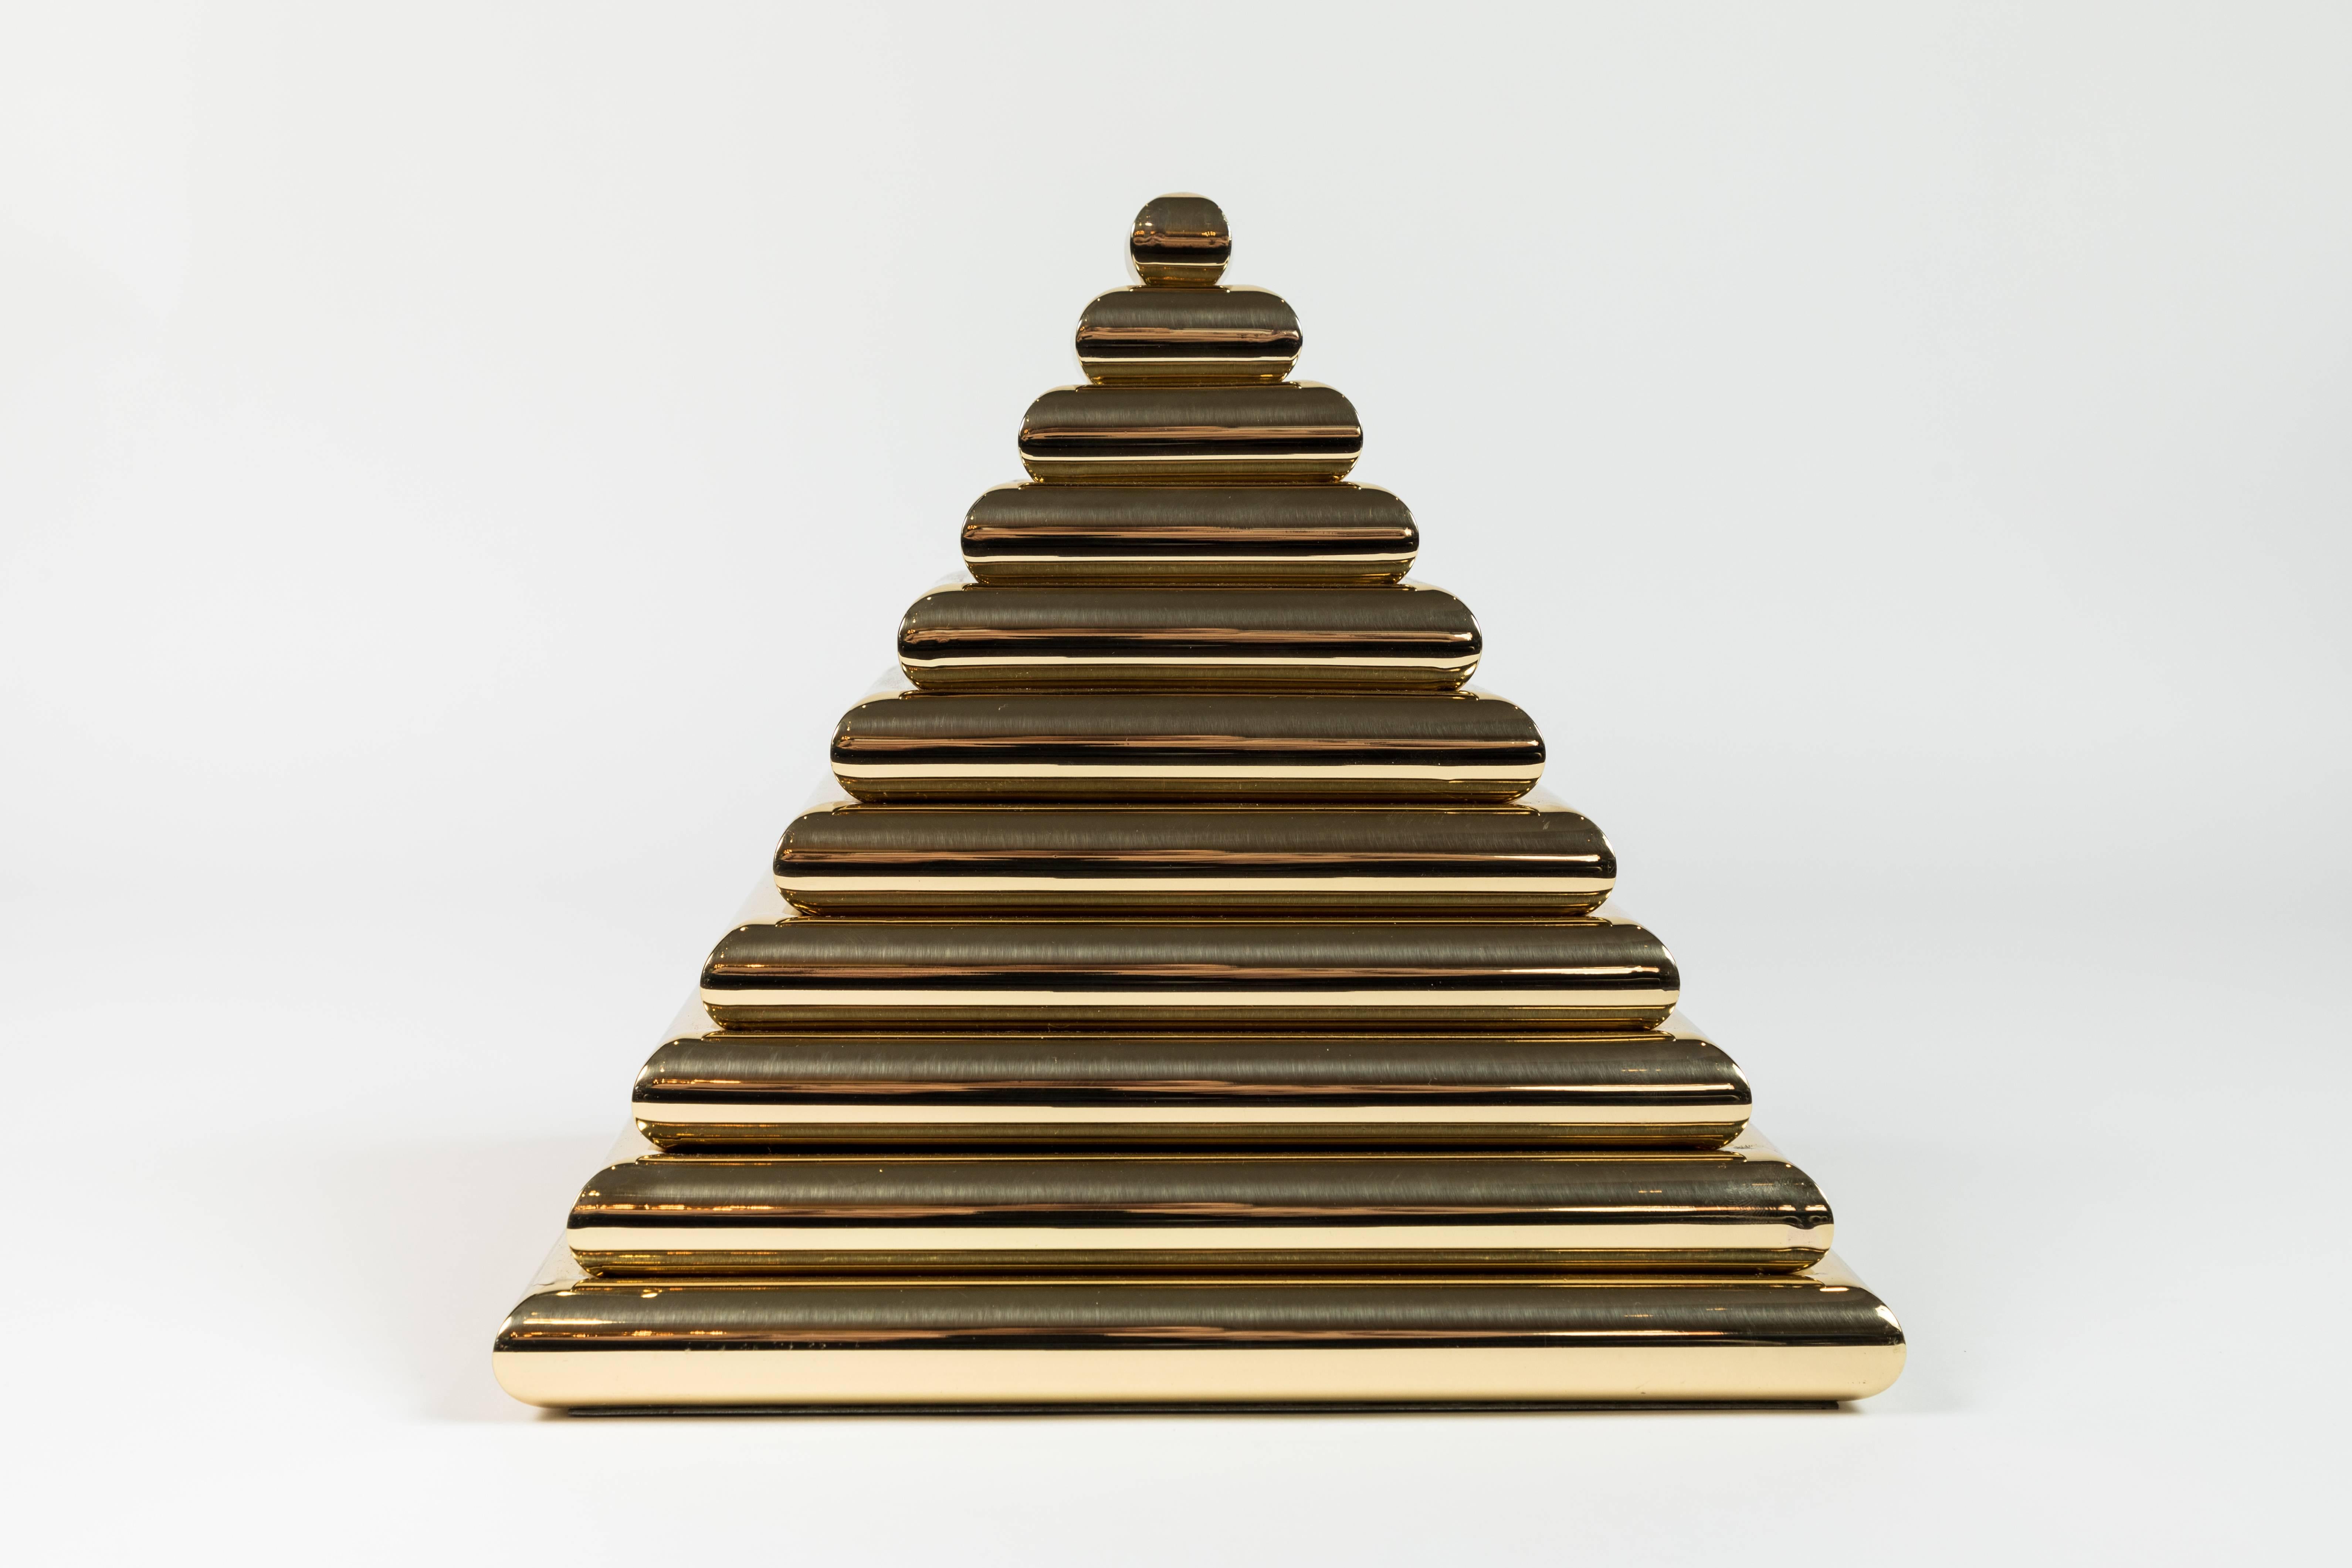 Striking pyramid shaped box in polished brass, Italian, circa 1970s. Top portion of box can be removed to reveal a storage compartment. Professionally polished.